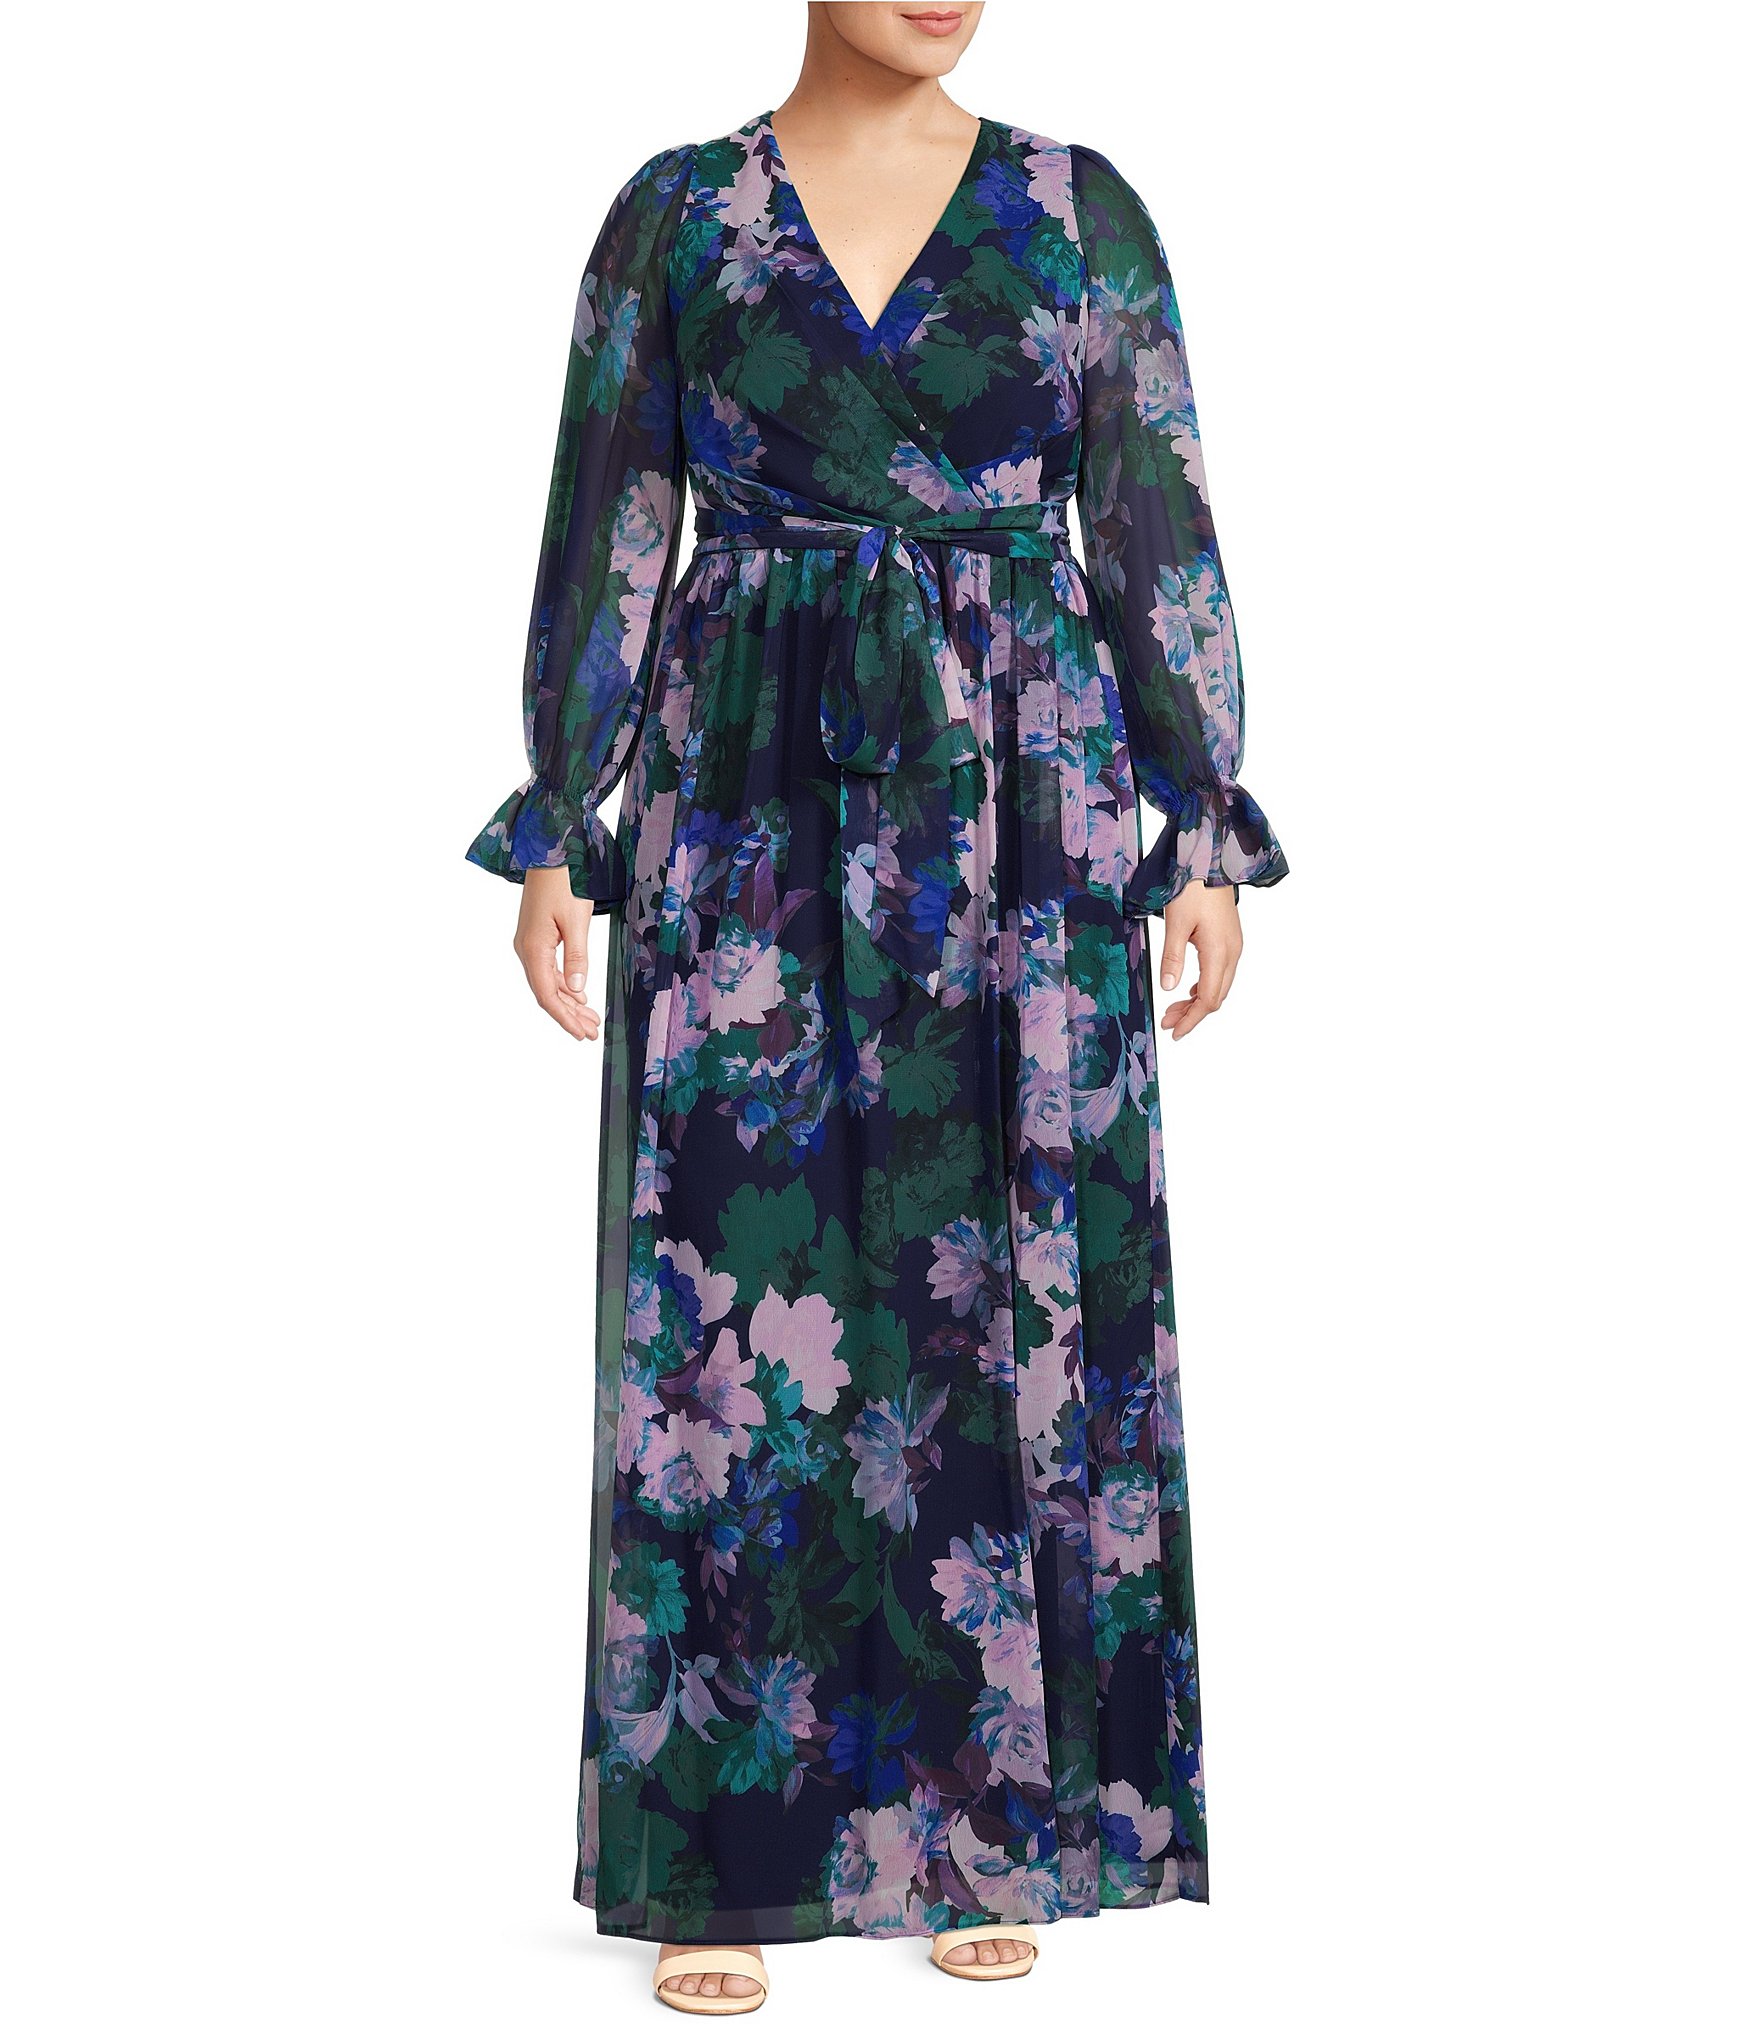 Adrianna Papell Plus Size Floral Print Long Sleeve Surplice V-Neck ...